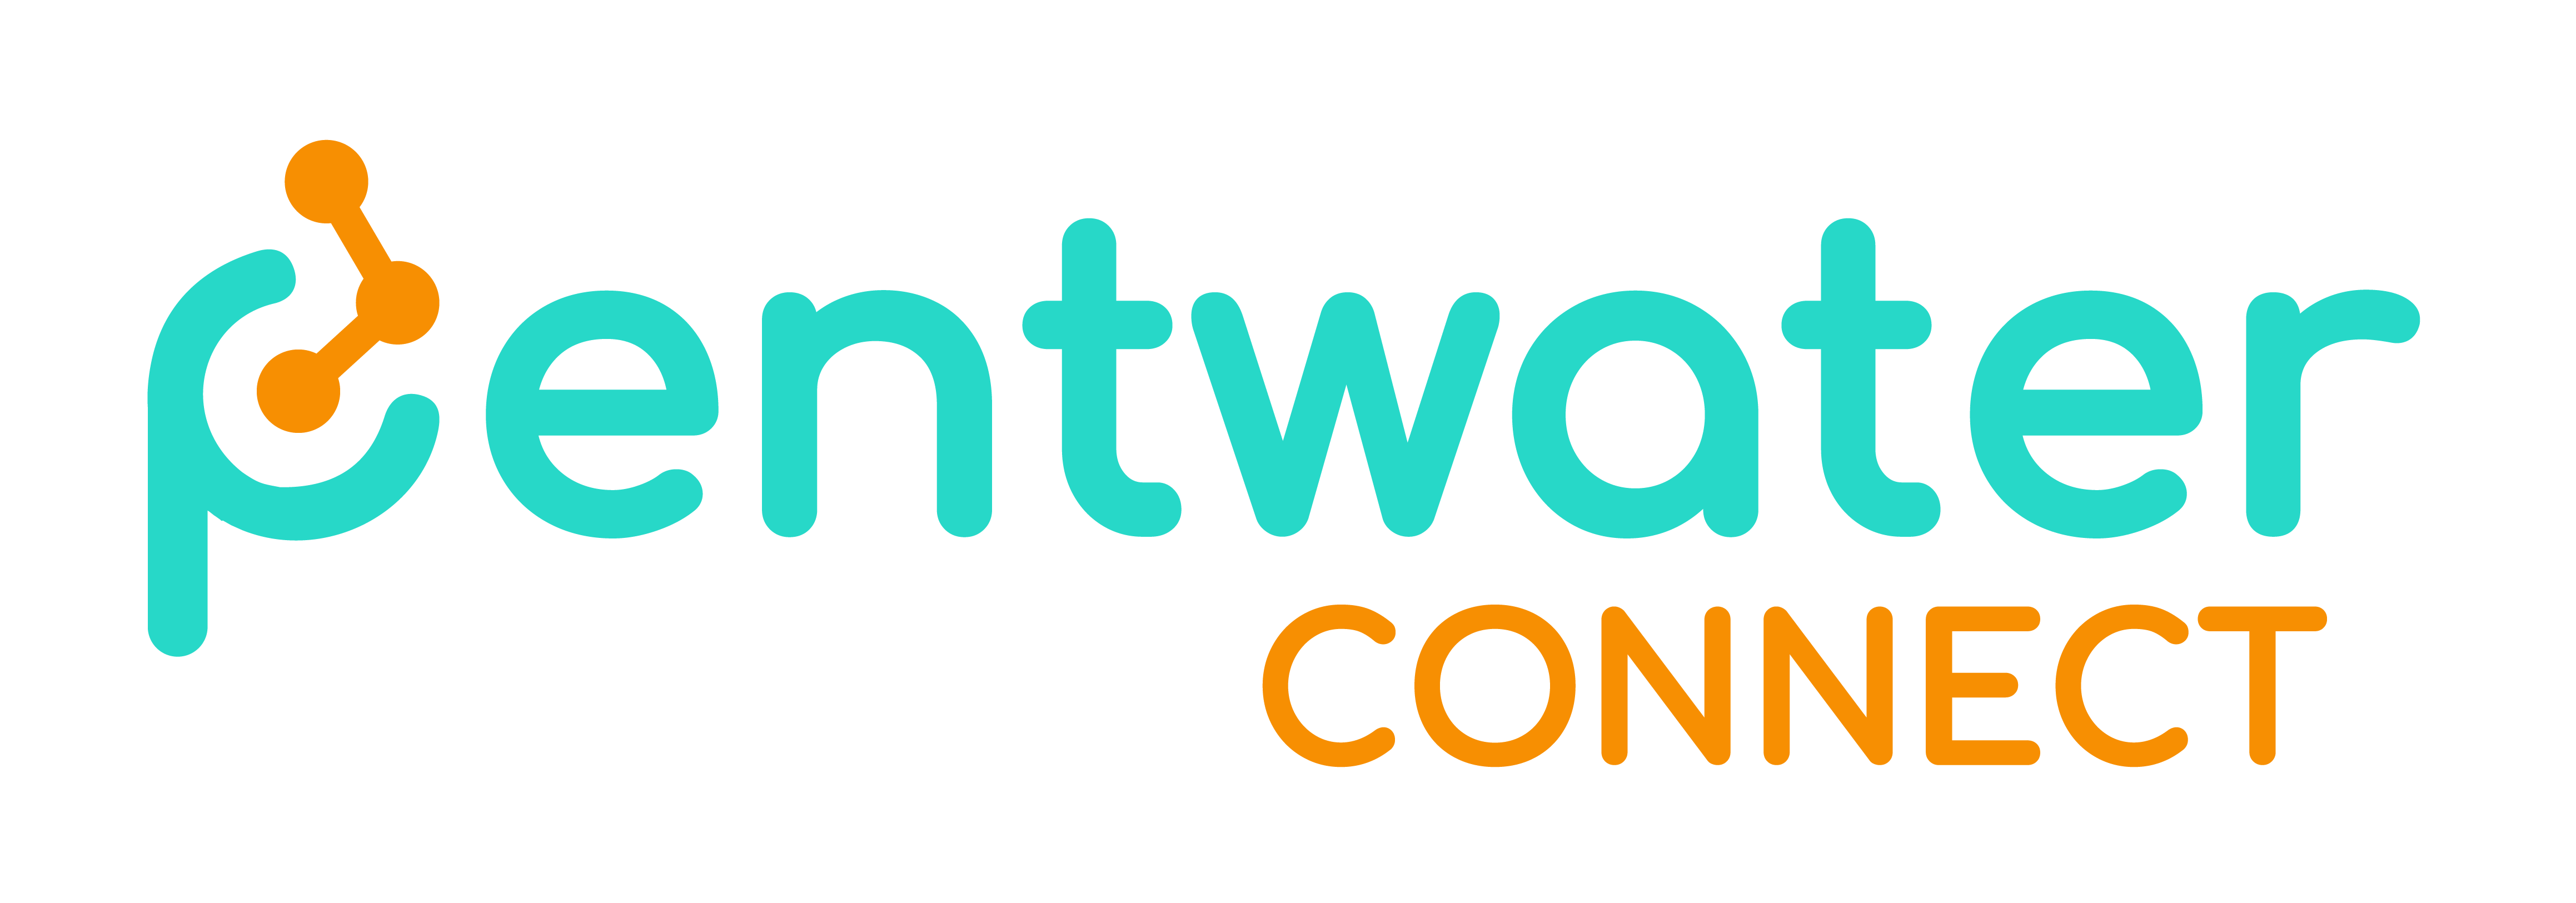 Pentwater Connect